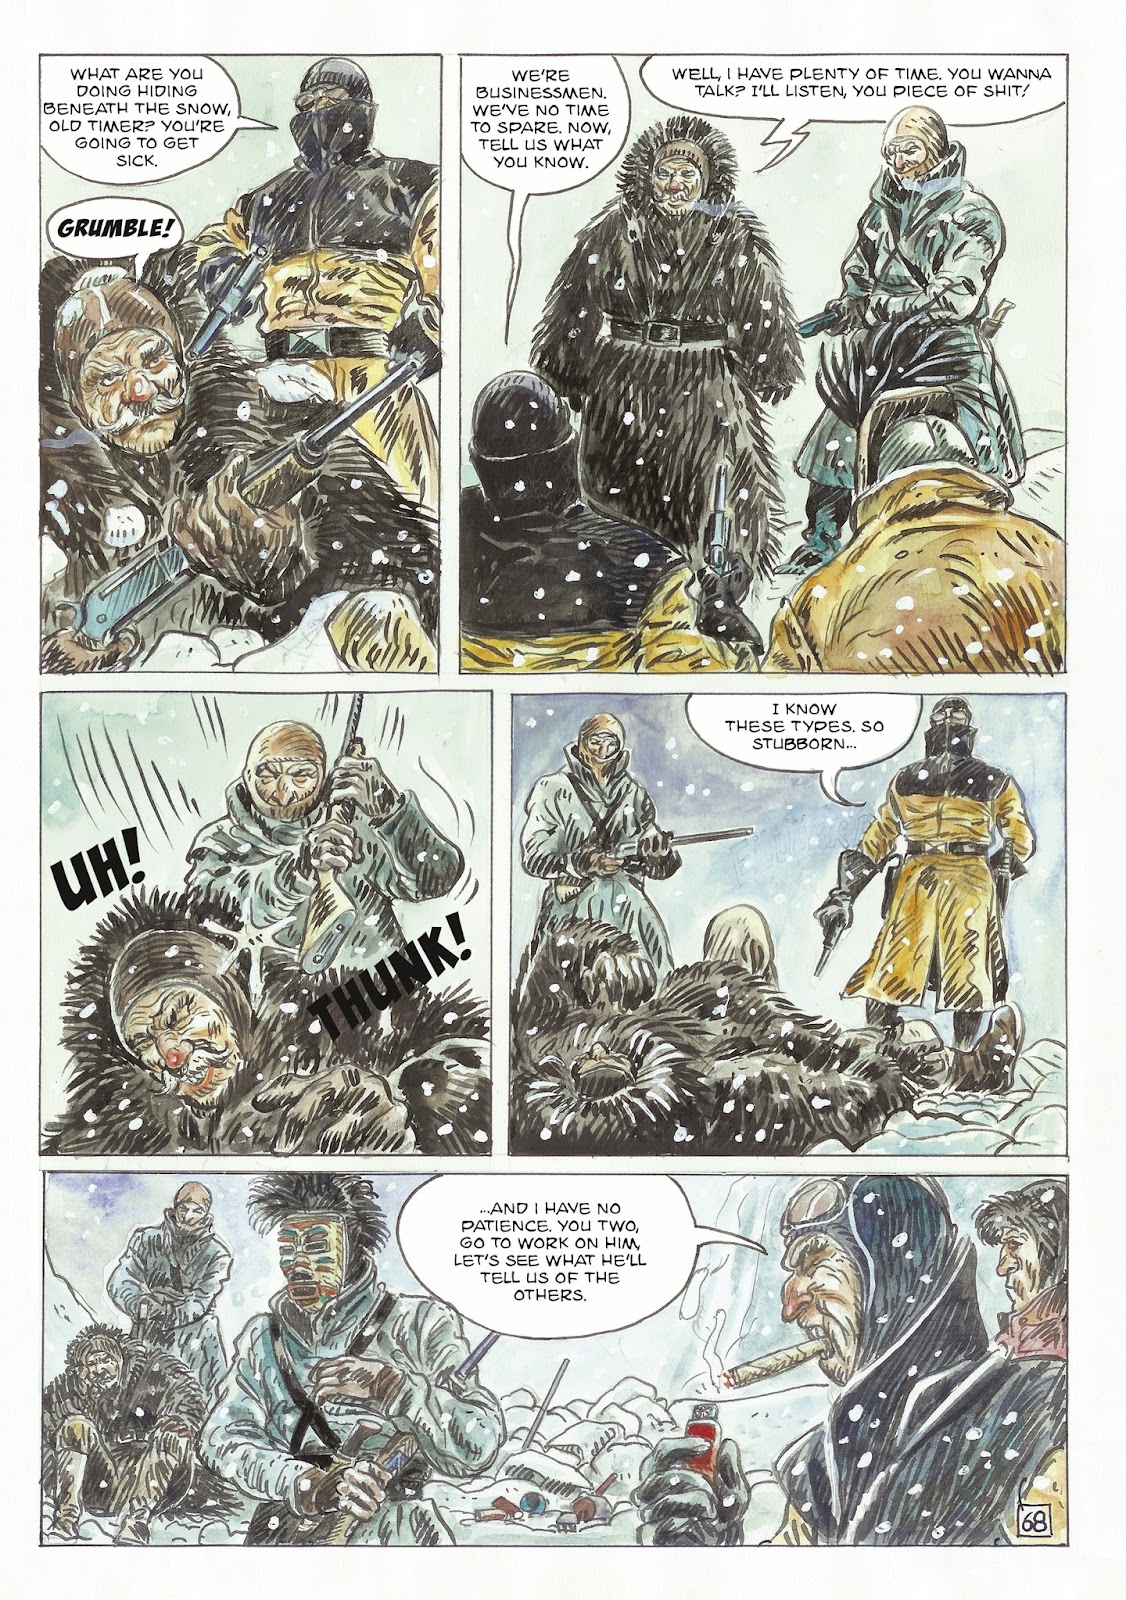 The Man With the Bear issue 2 - Page 14